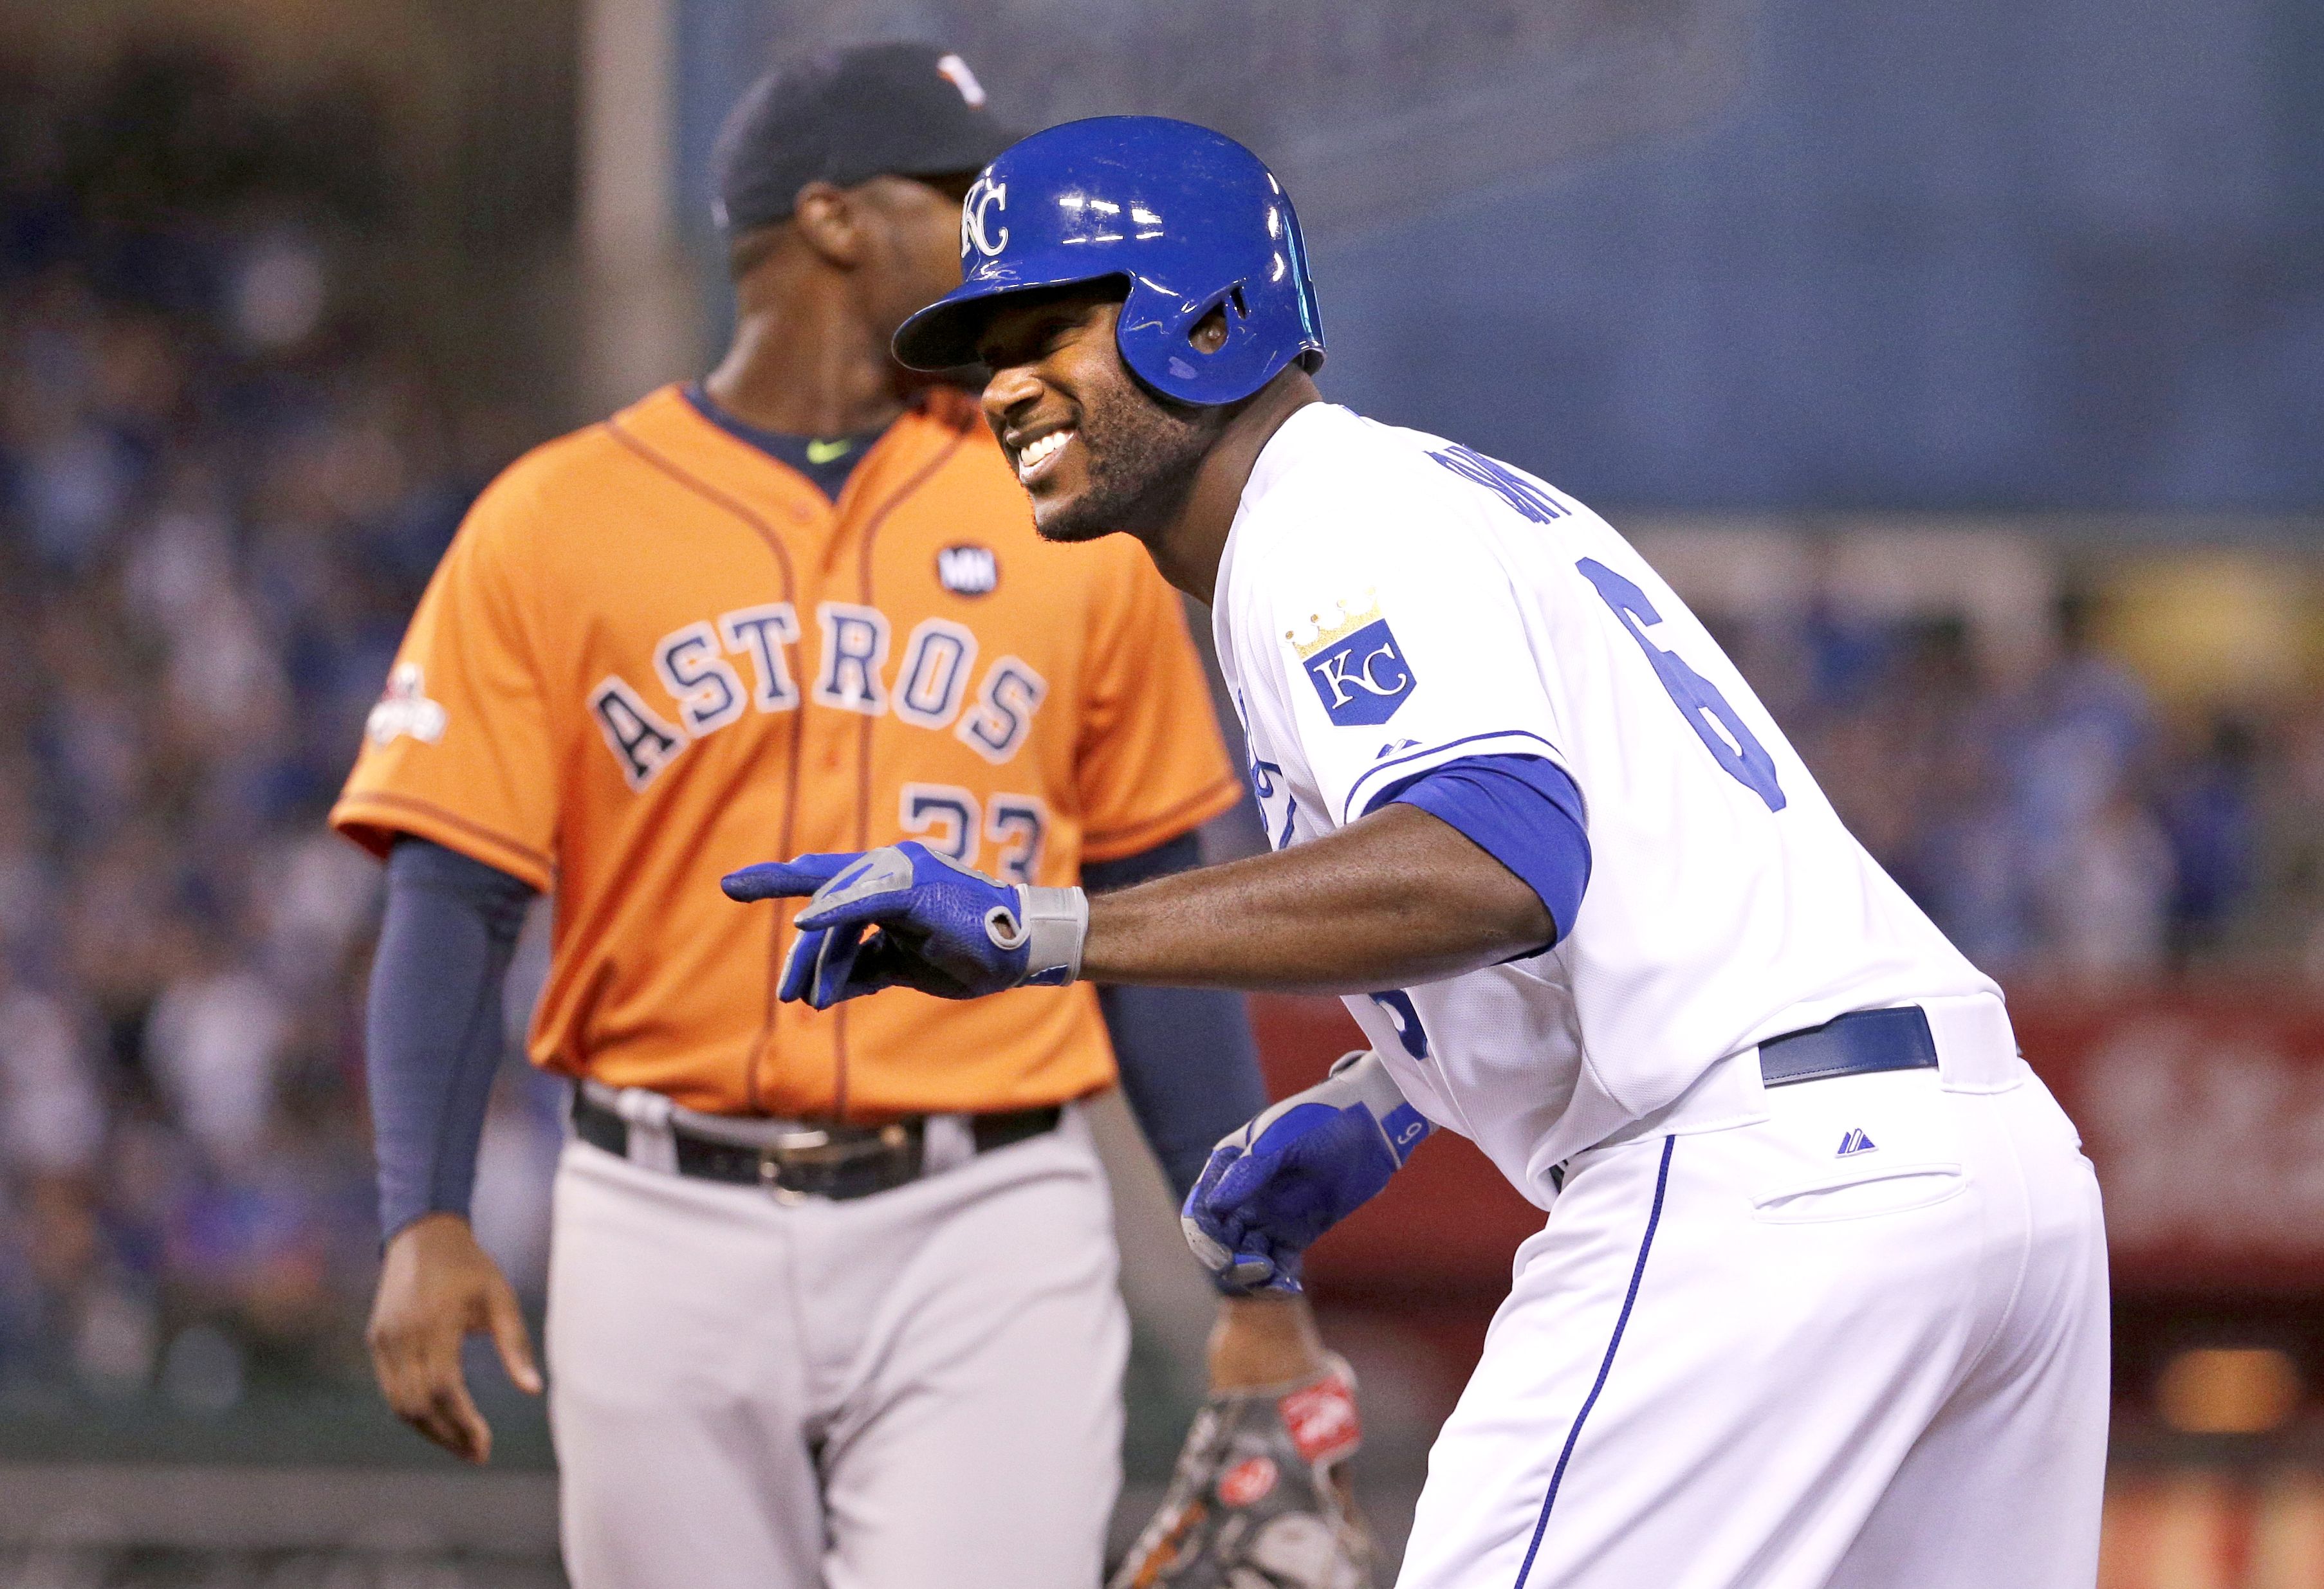 Cain is able Photos Astros vs. Royals in ALDS ESPN